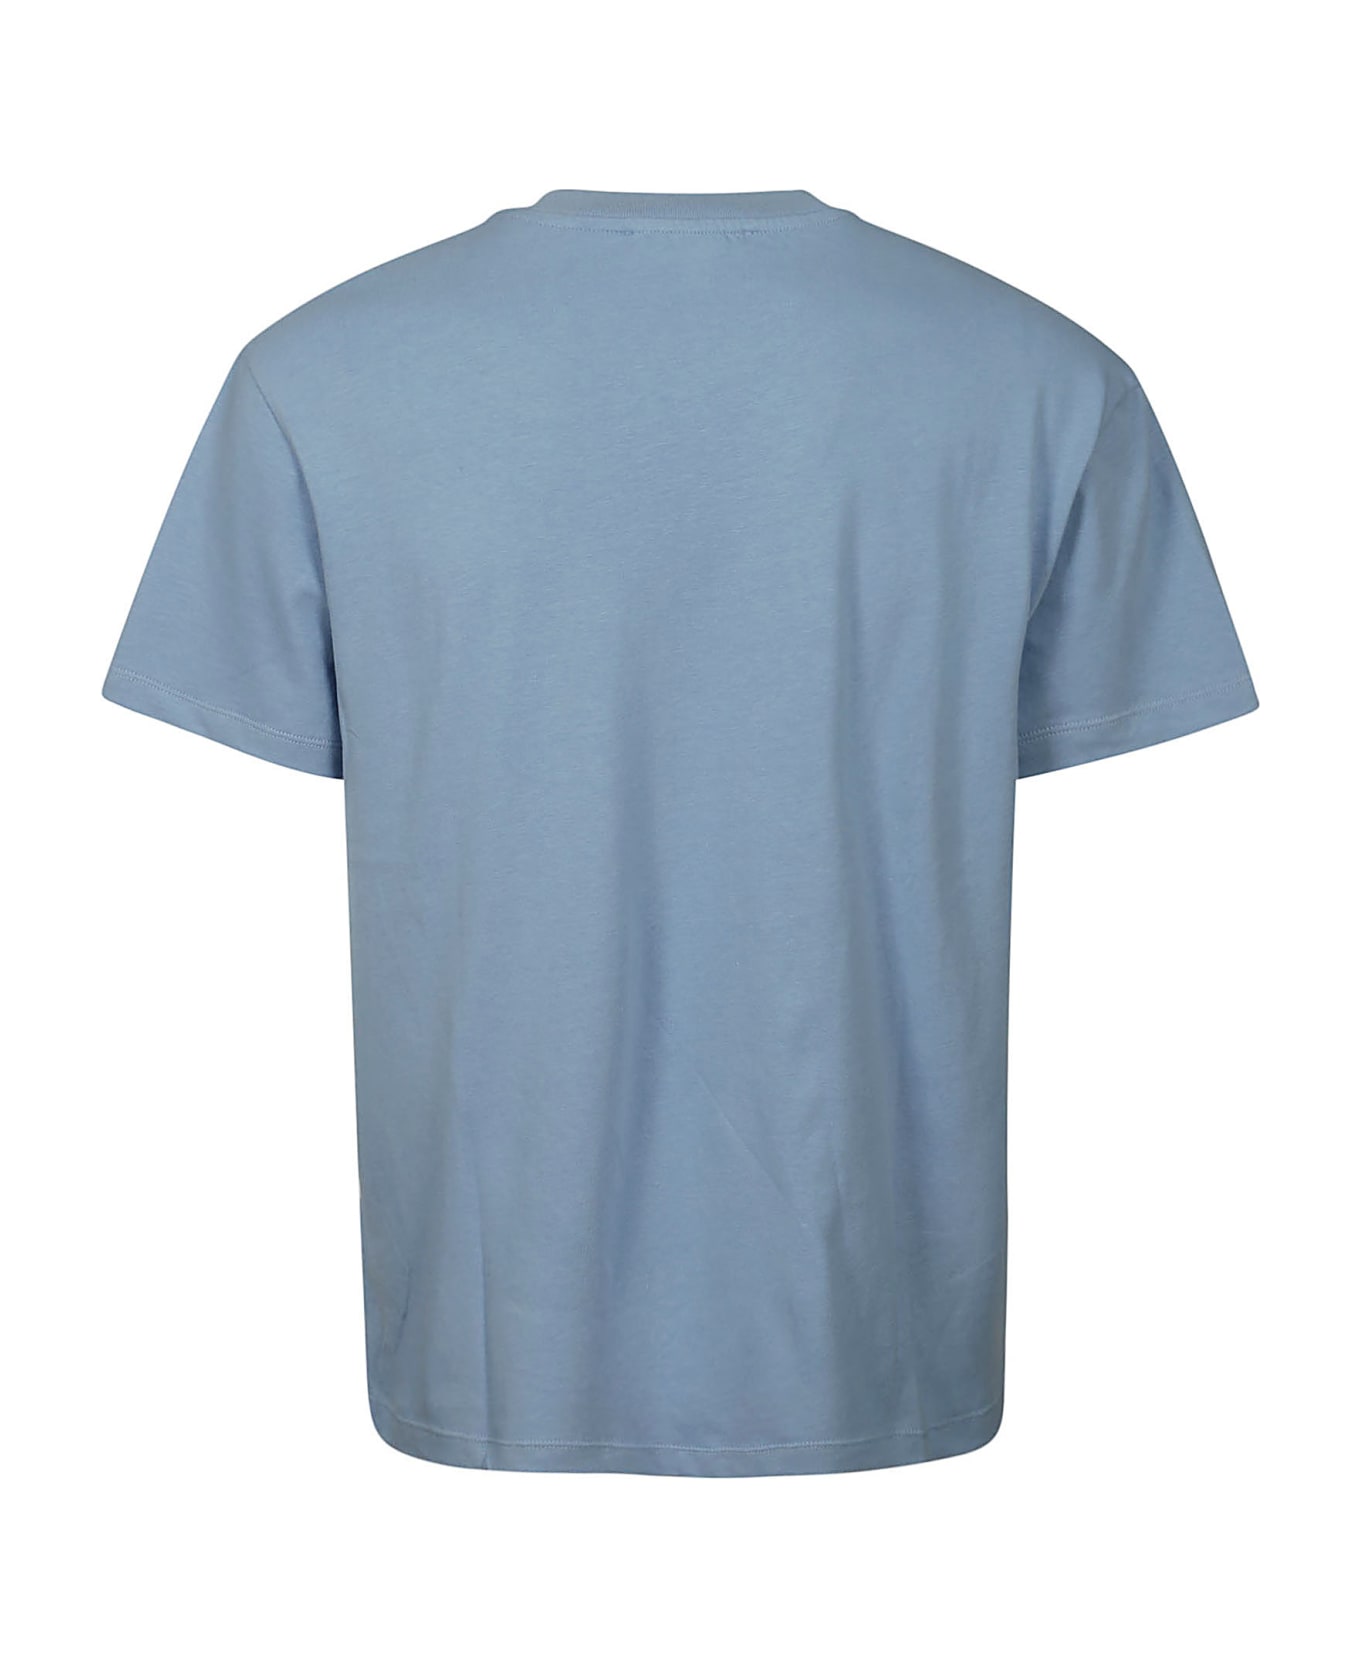 ih nom uh nit T-shirt Classic Fit With Logo Blurred - Sky Blue